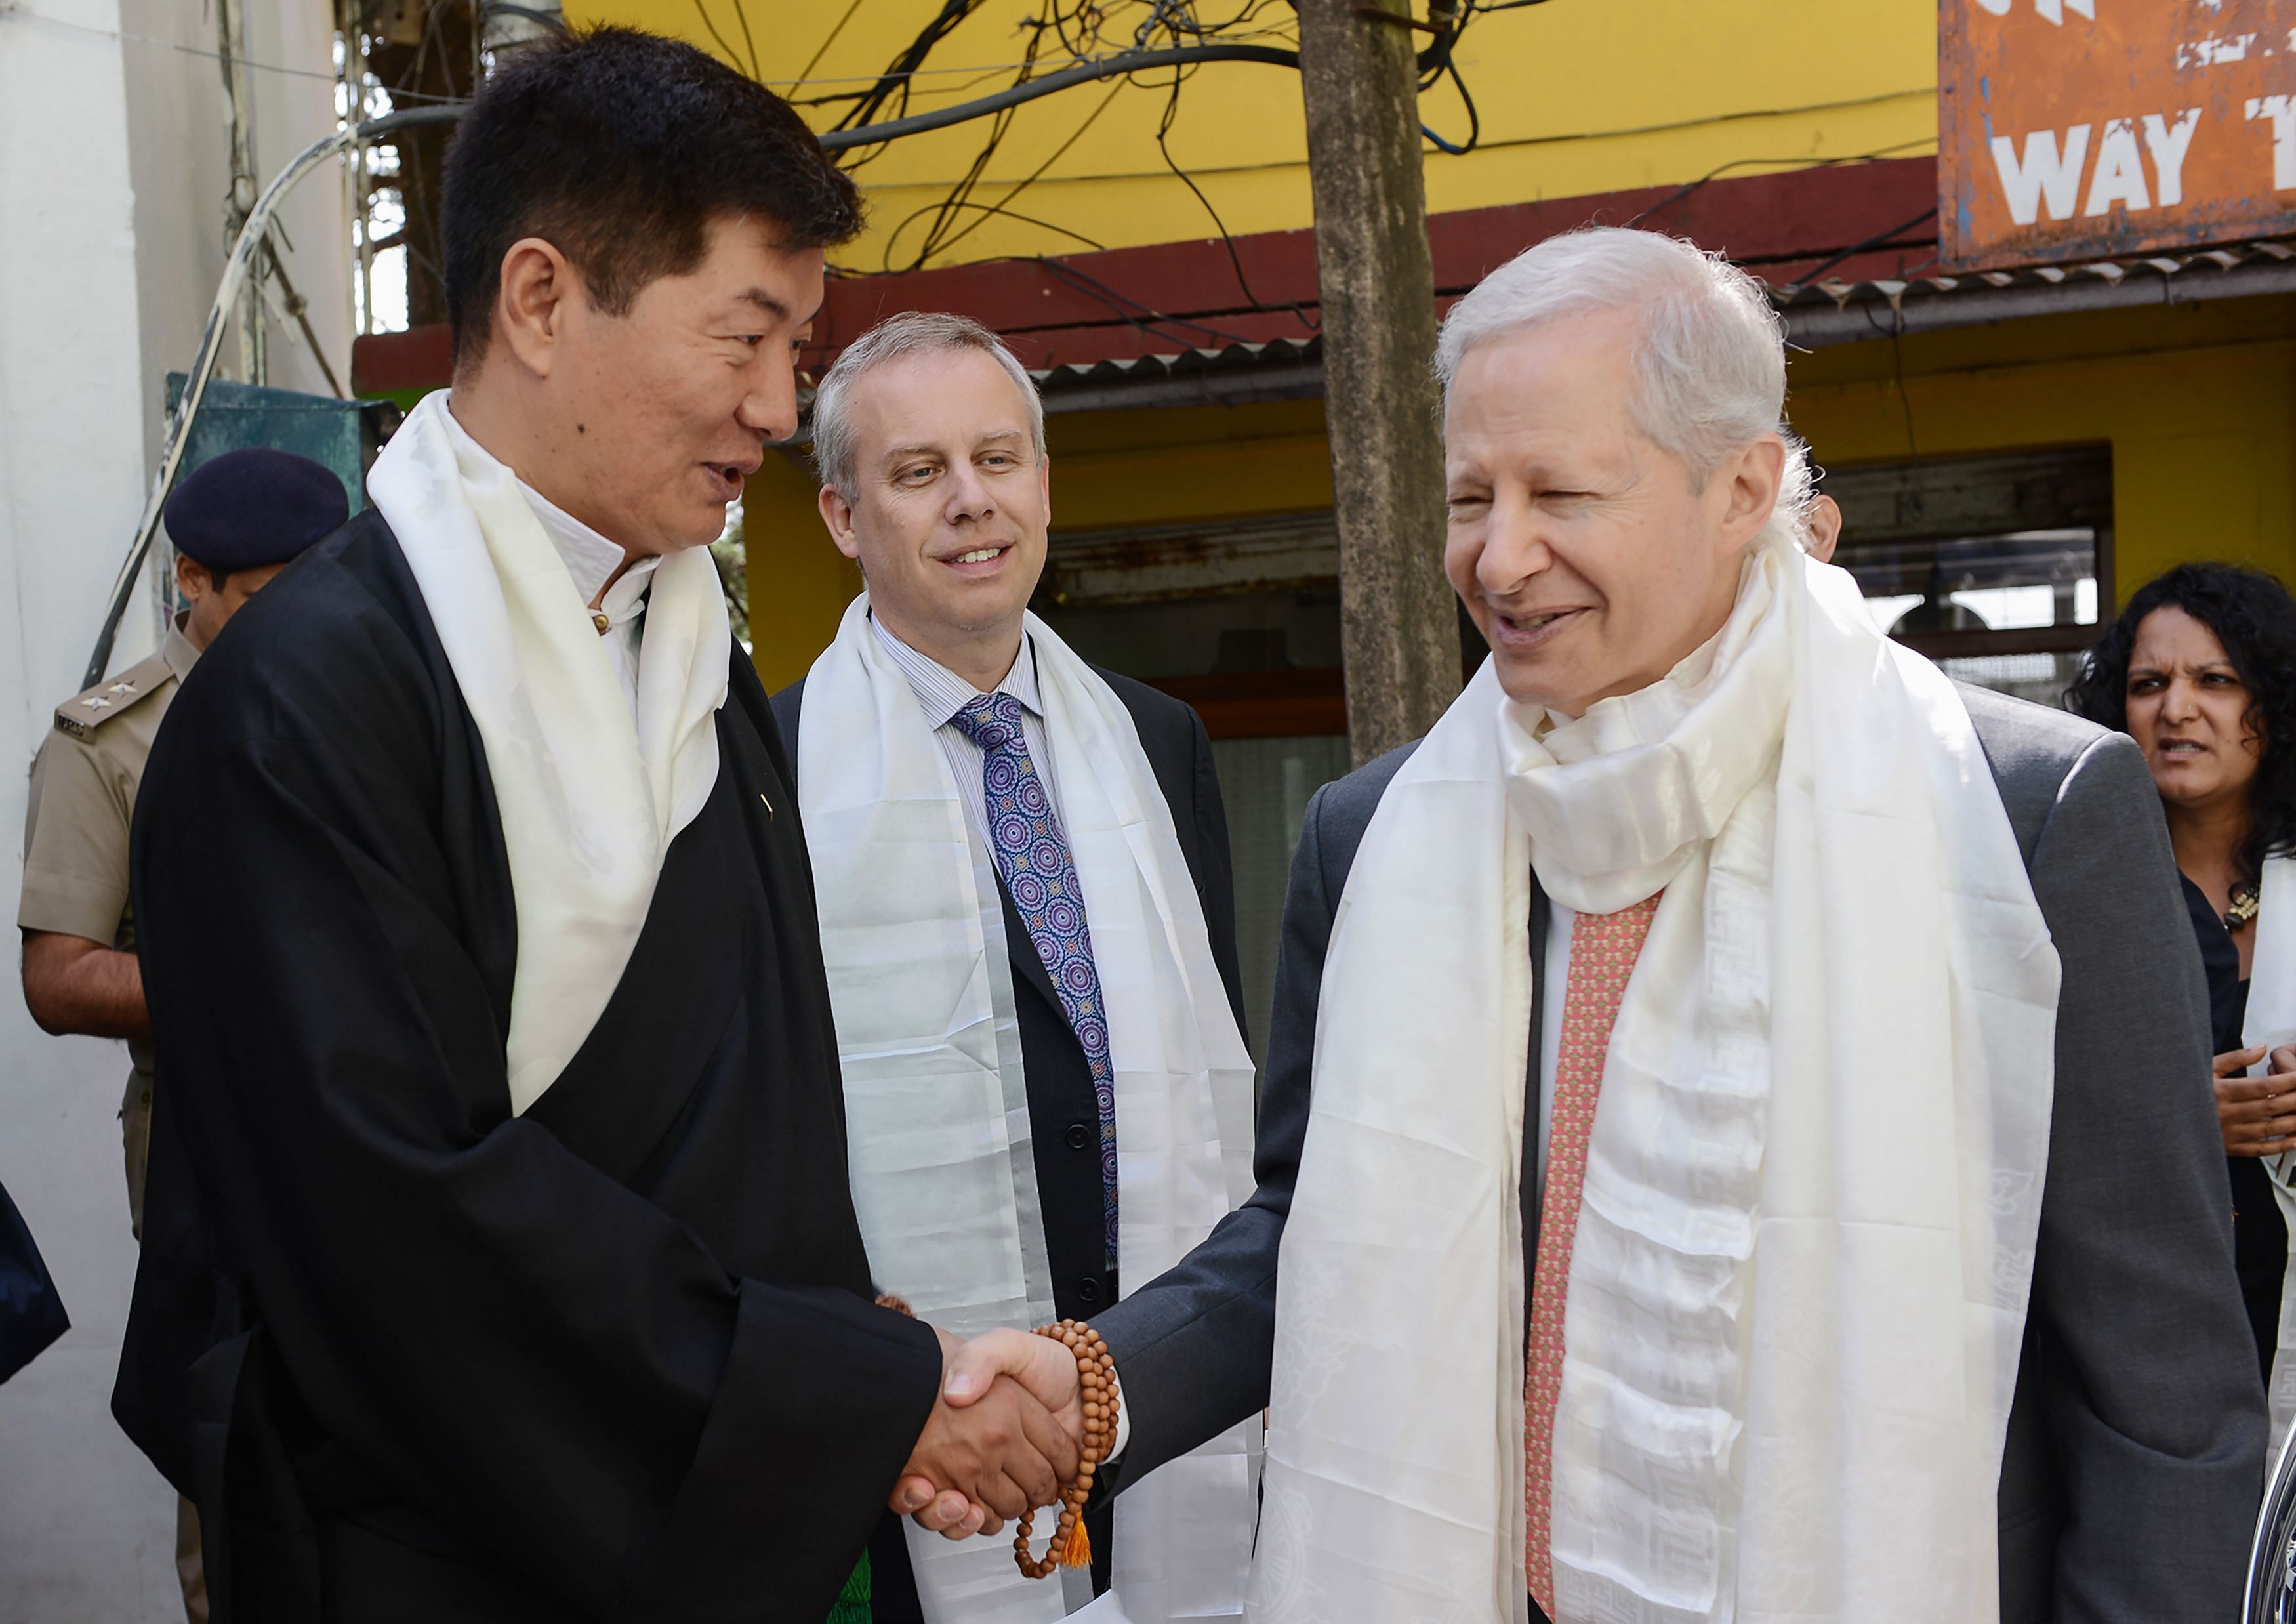 US Ambassador to India Kenneth Juster shakes hands with President of Central Tibetan Administration Lobsang Sangay. Credit: AFP Photo